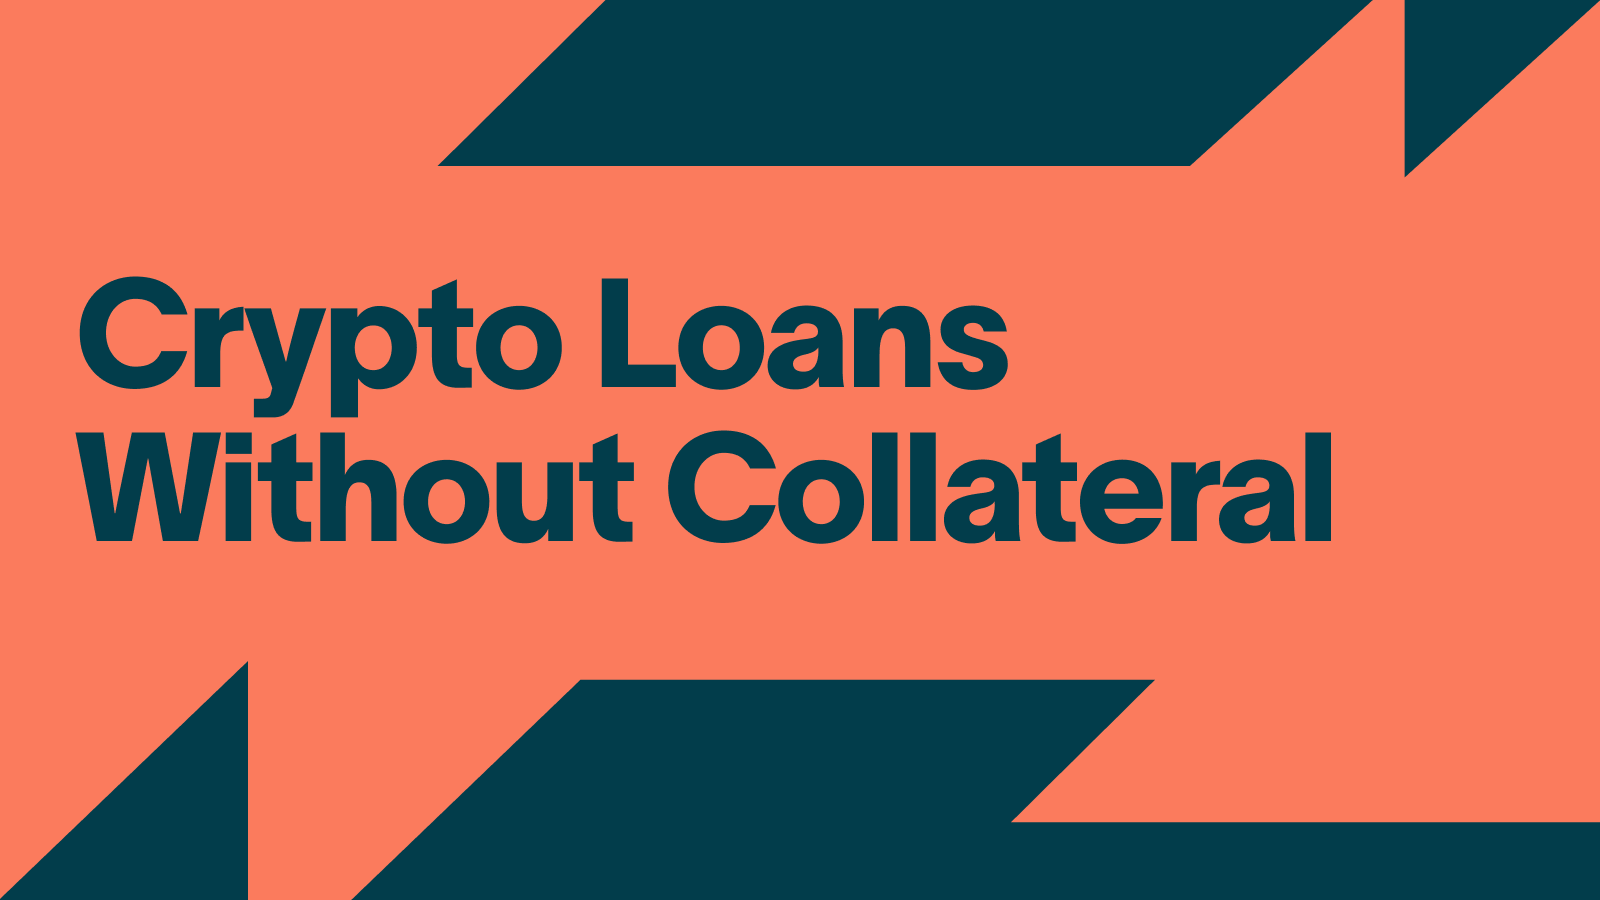 Crypto Loans Without Collateral - The Complete Guide